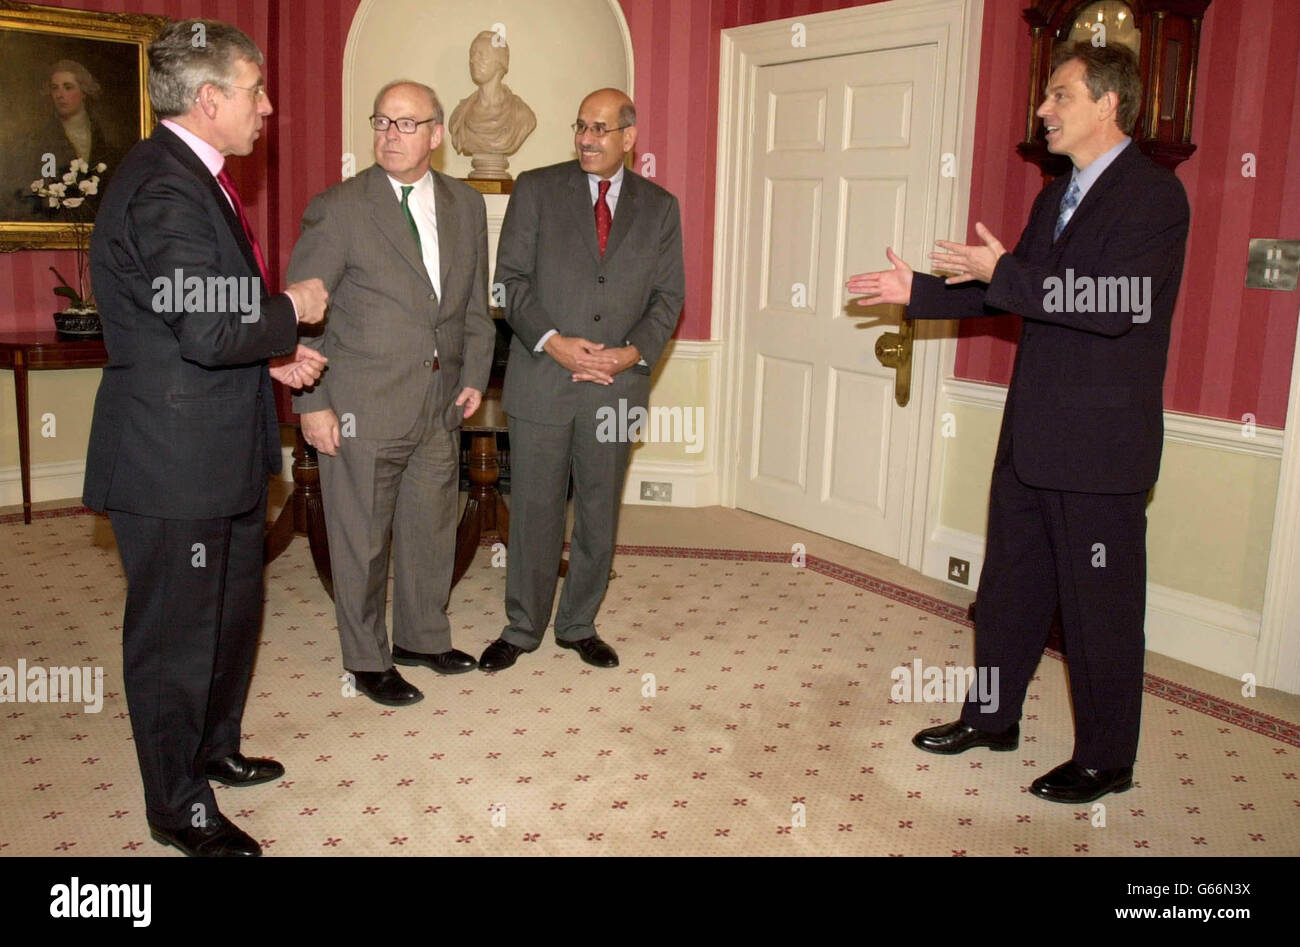 British Prime Minister, Tony Blair (right), with British Foreign Secretary Jack Straw (left), the United Nations Cheif Weapons Inspector, Hans Blix, (second left) and the Head of International Atomic Energy Agency Mohamed El Baradei, at 10 Downing Street. * Mr El Baradei said Saddam Hussein s regime needed to show progress by the time the inspectors produced their next report to the UN on February 14. Stock Photo